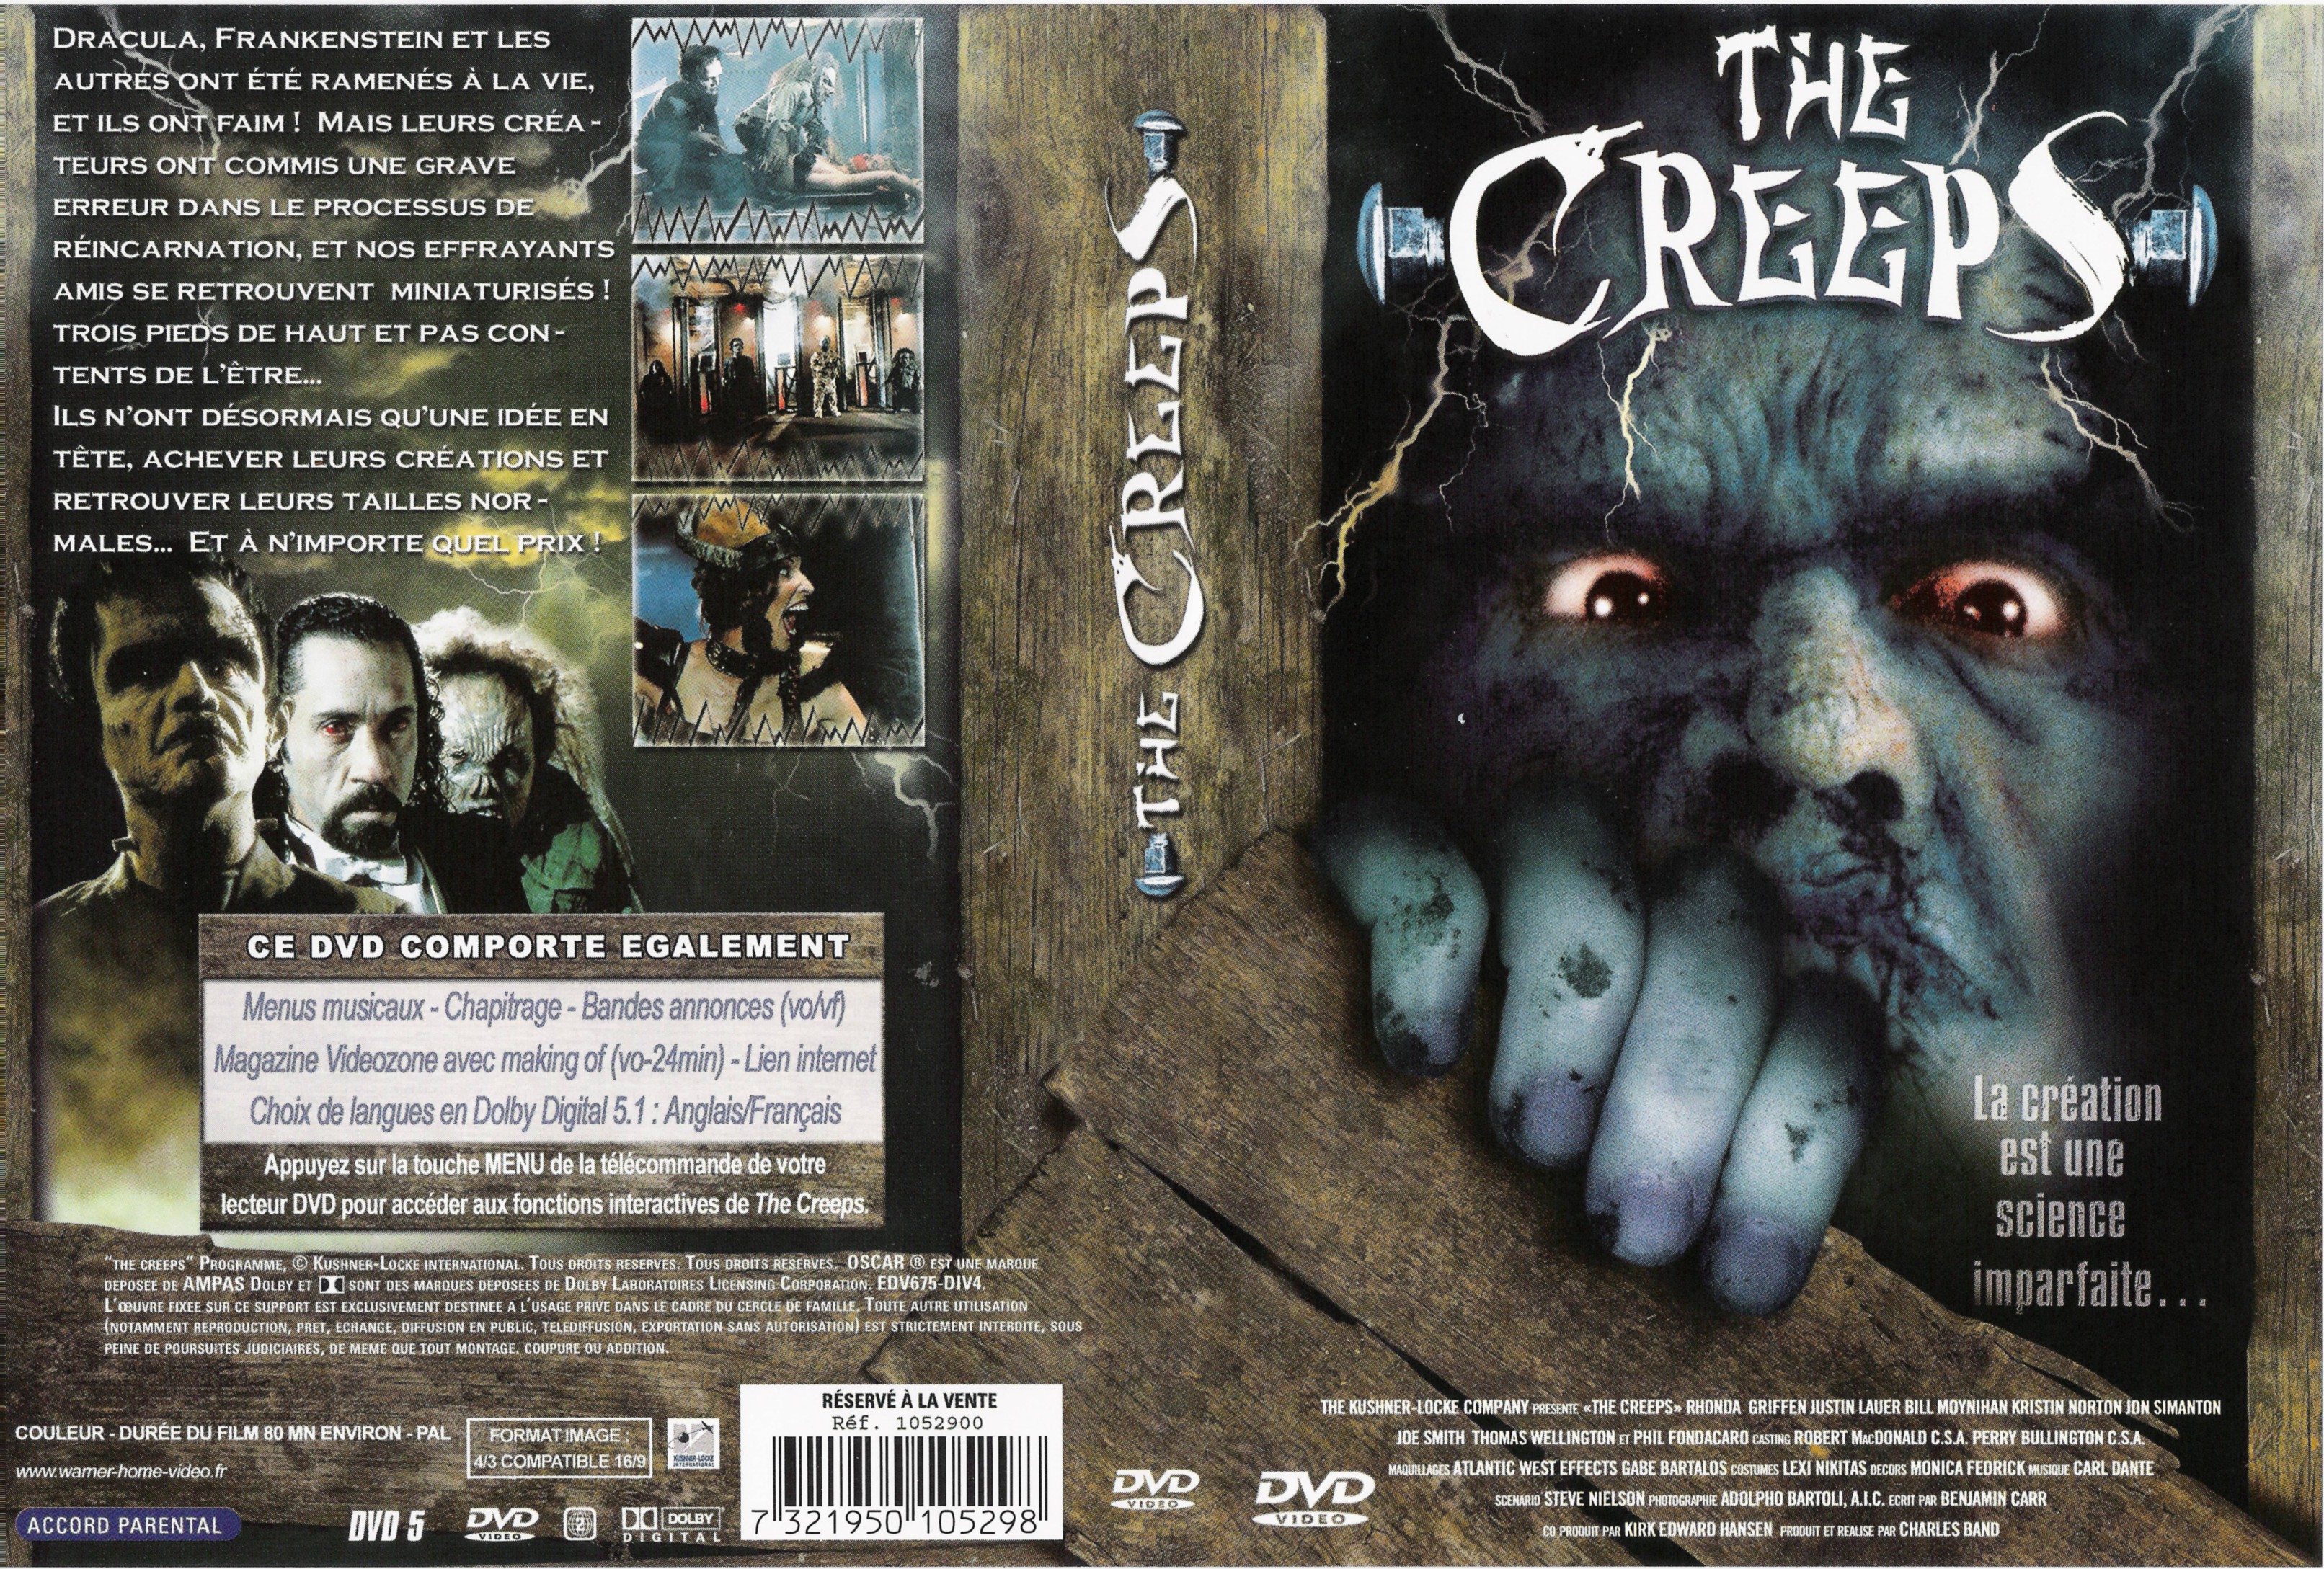 Jaquette DVD The creeps